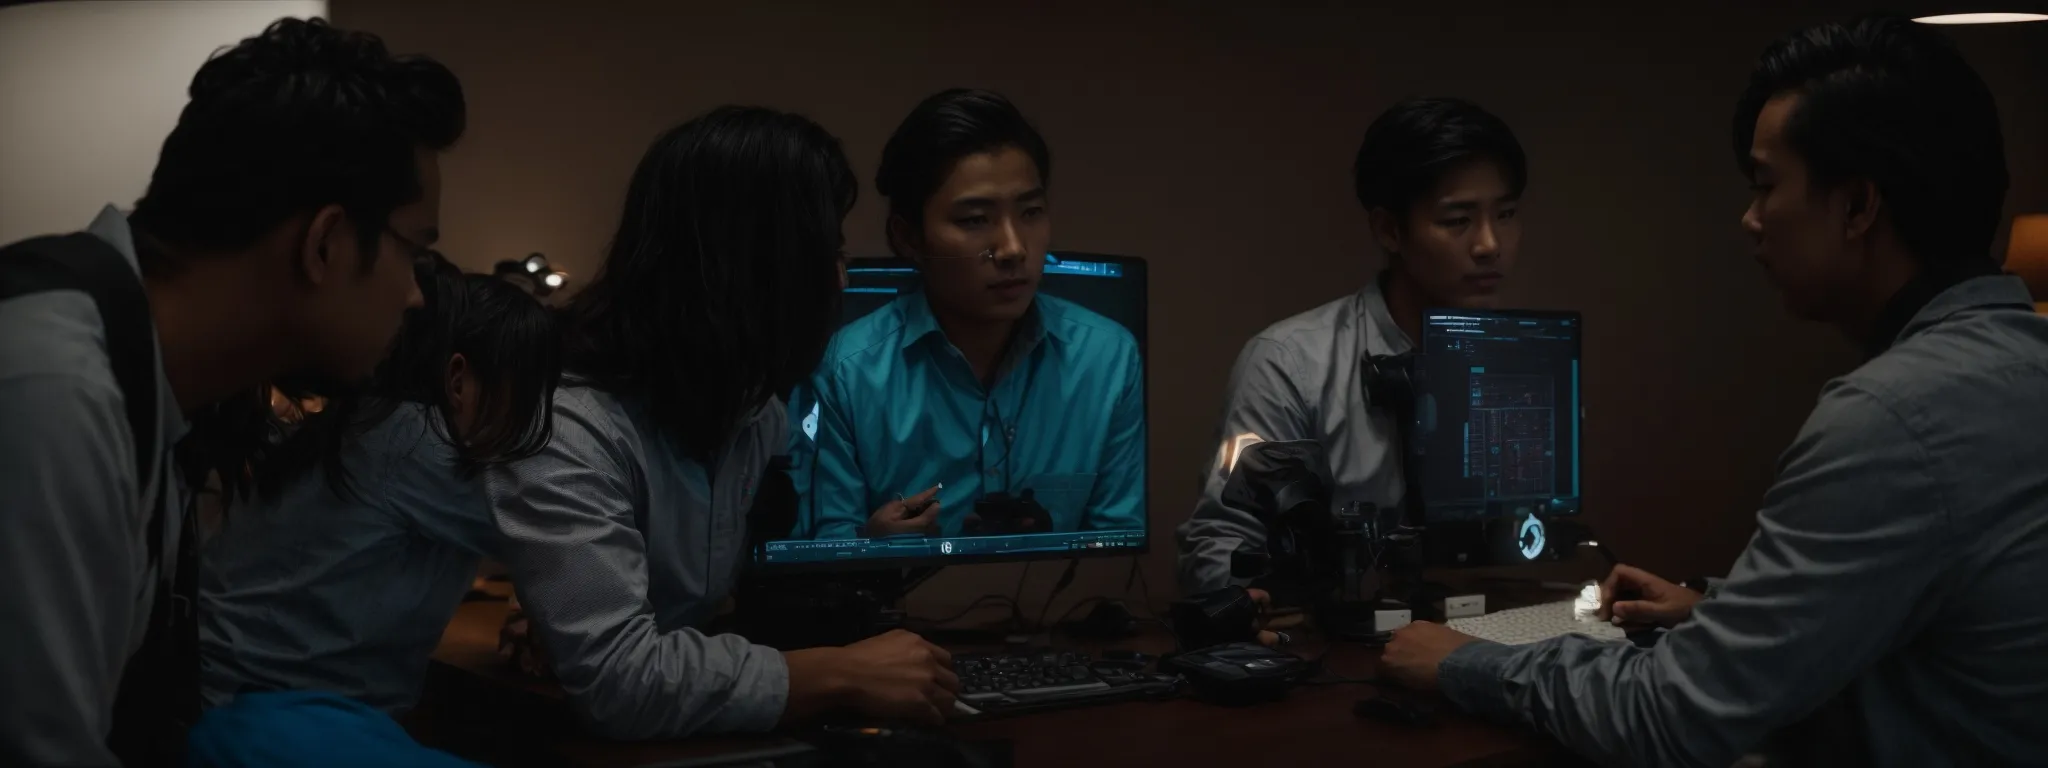 a team gathered around a computer discussing a strategy.